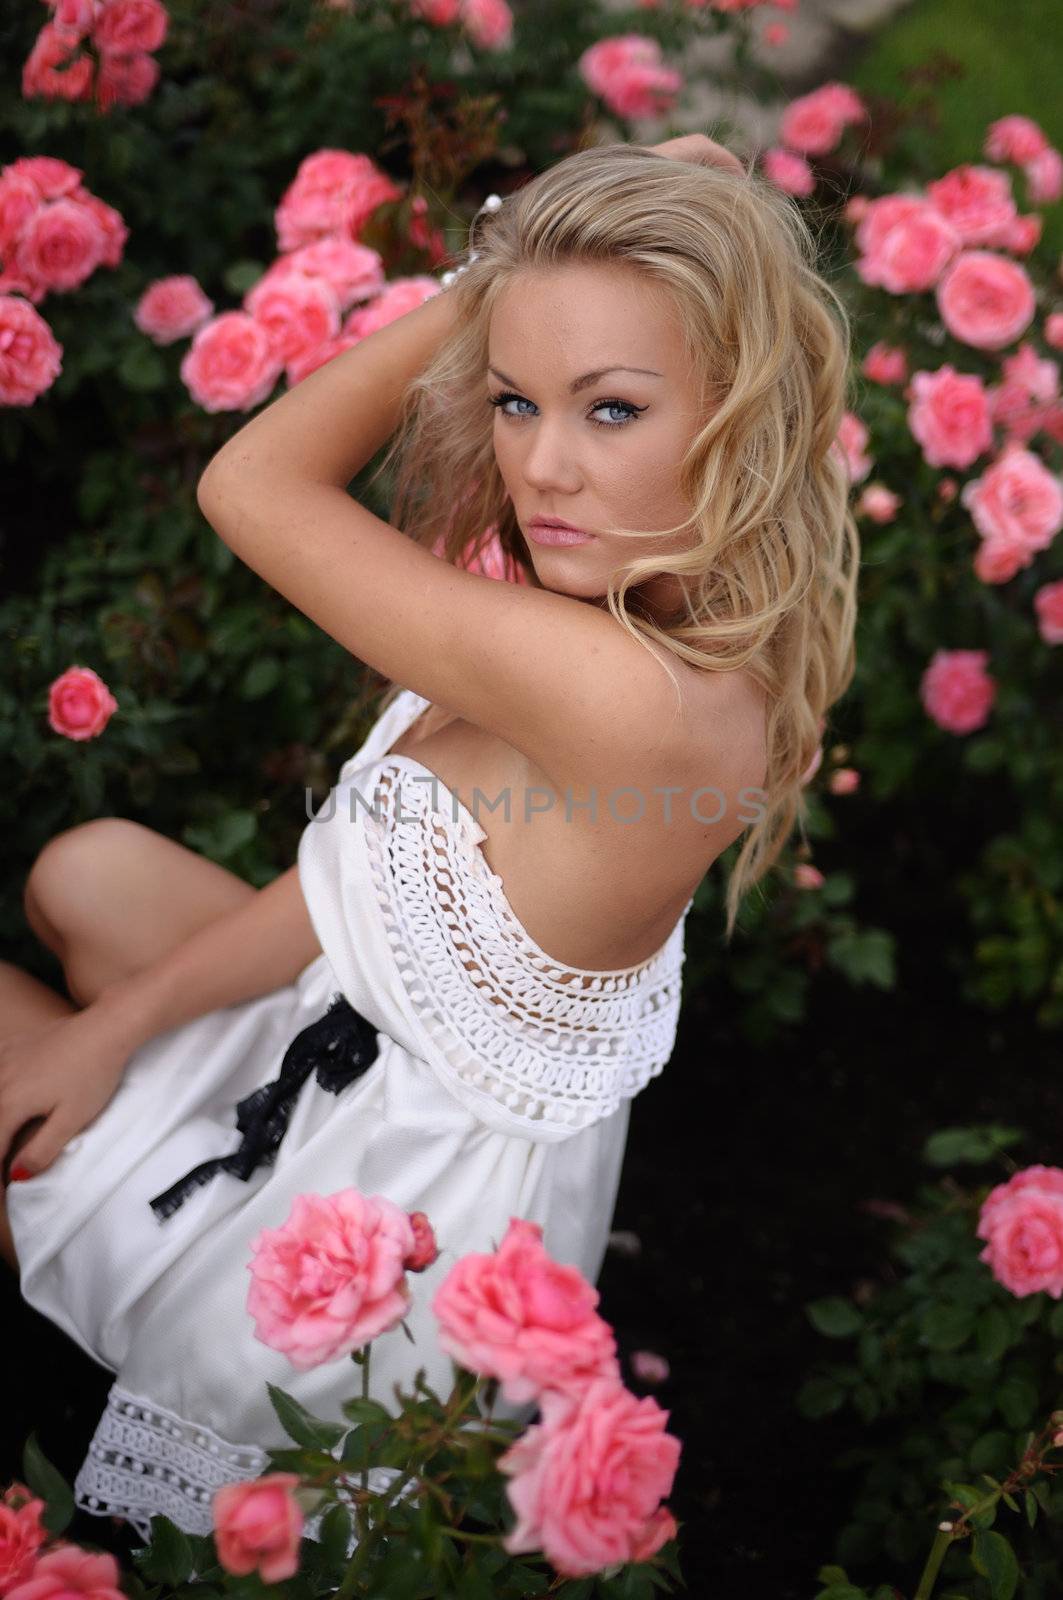 Overhead portrait of a beautiful blonde woman sitting in a bed of pink roses and looking up at the camera.